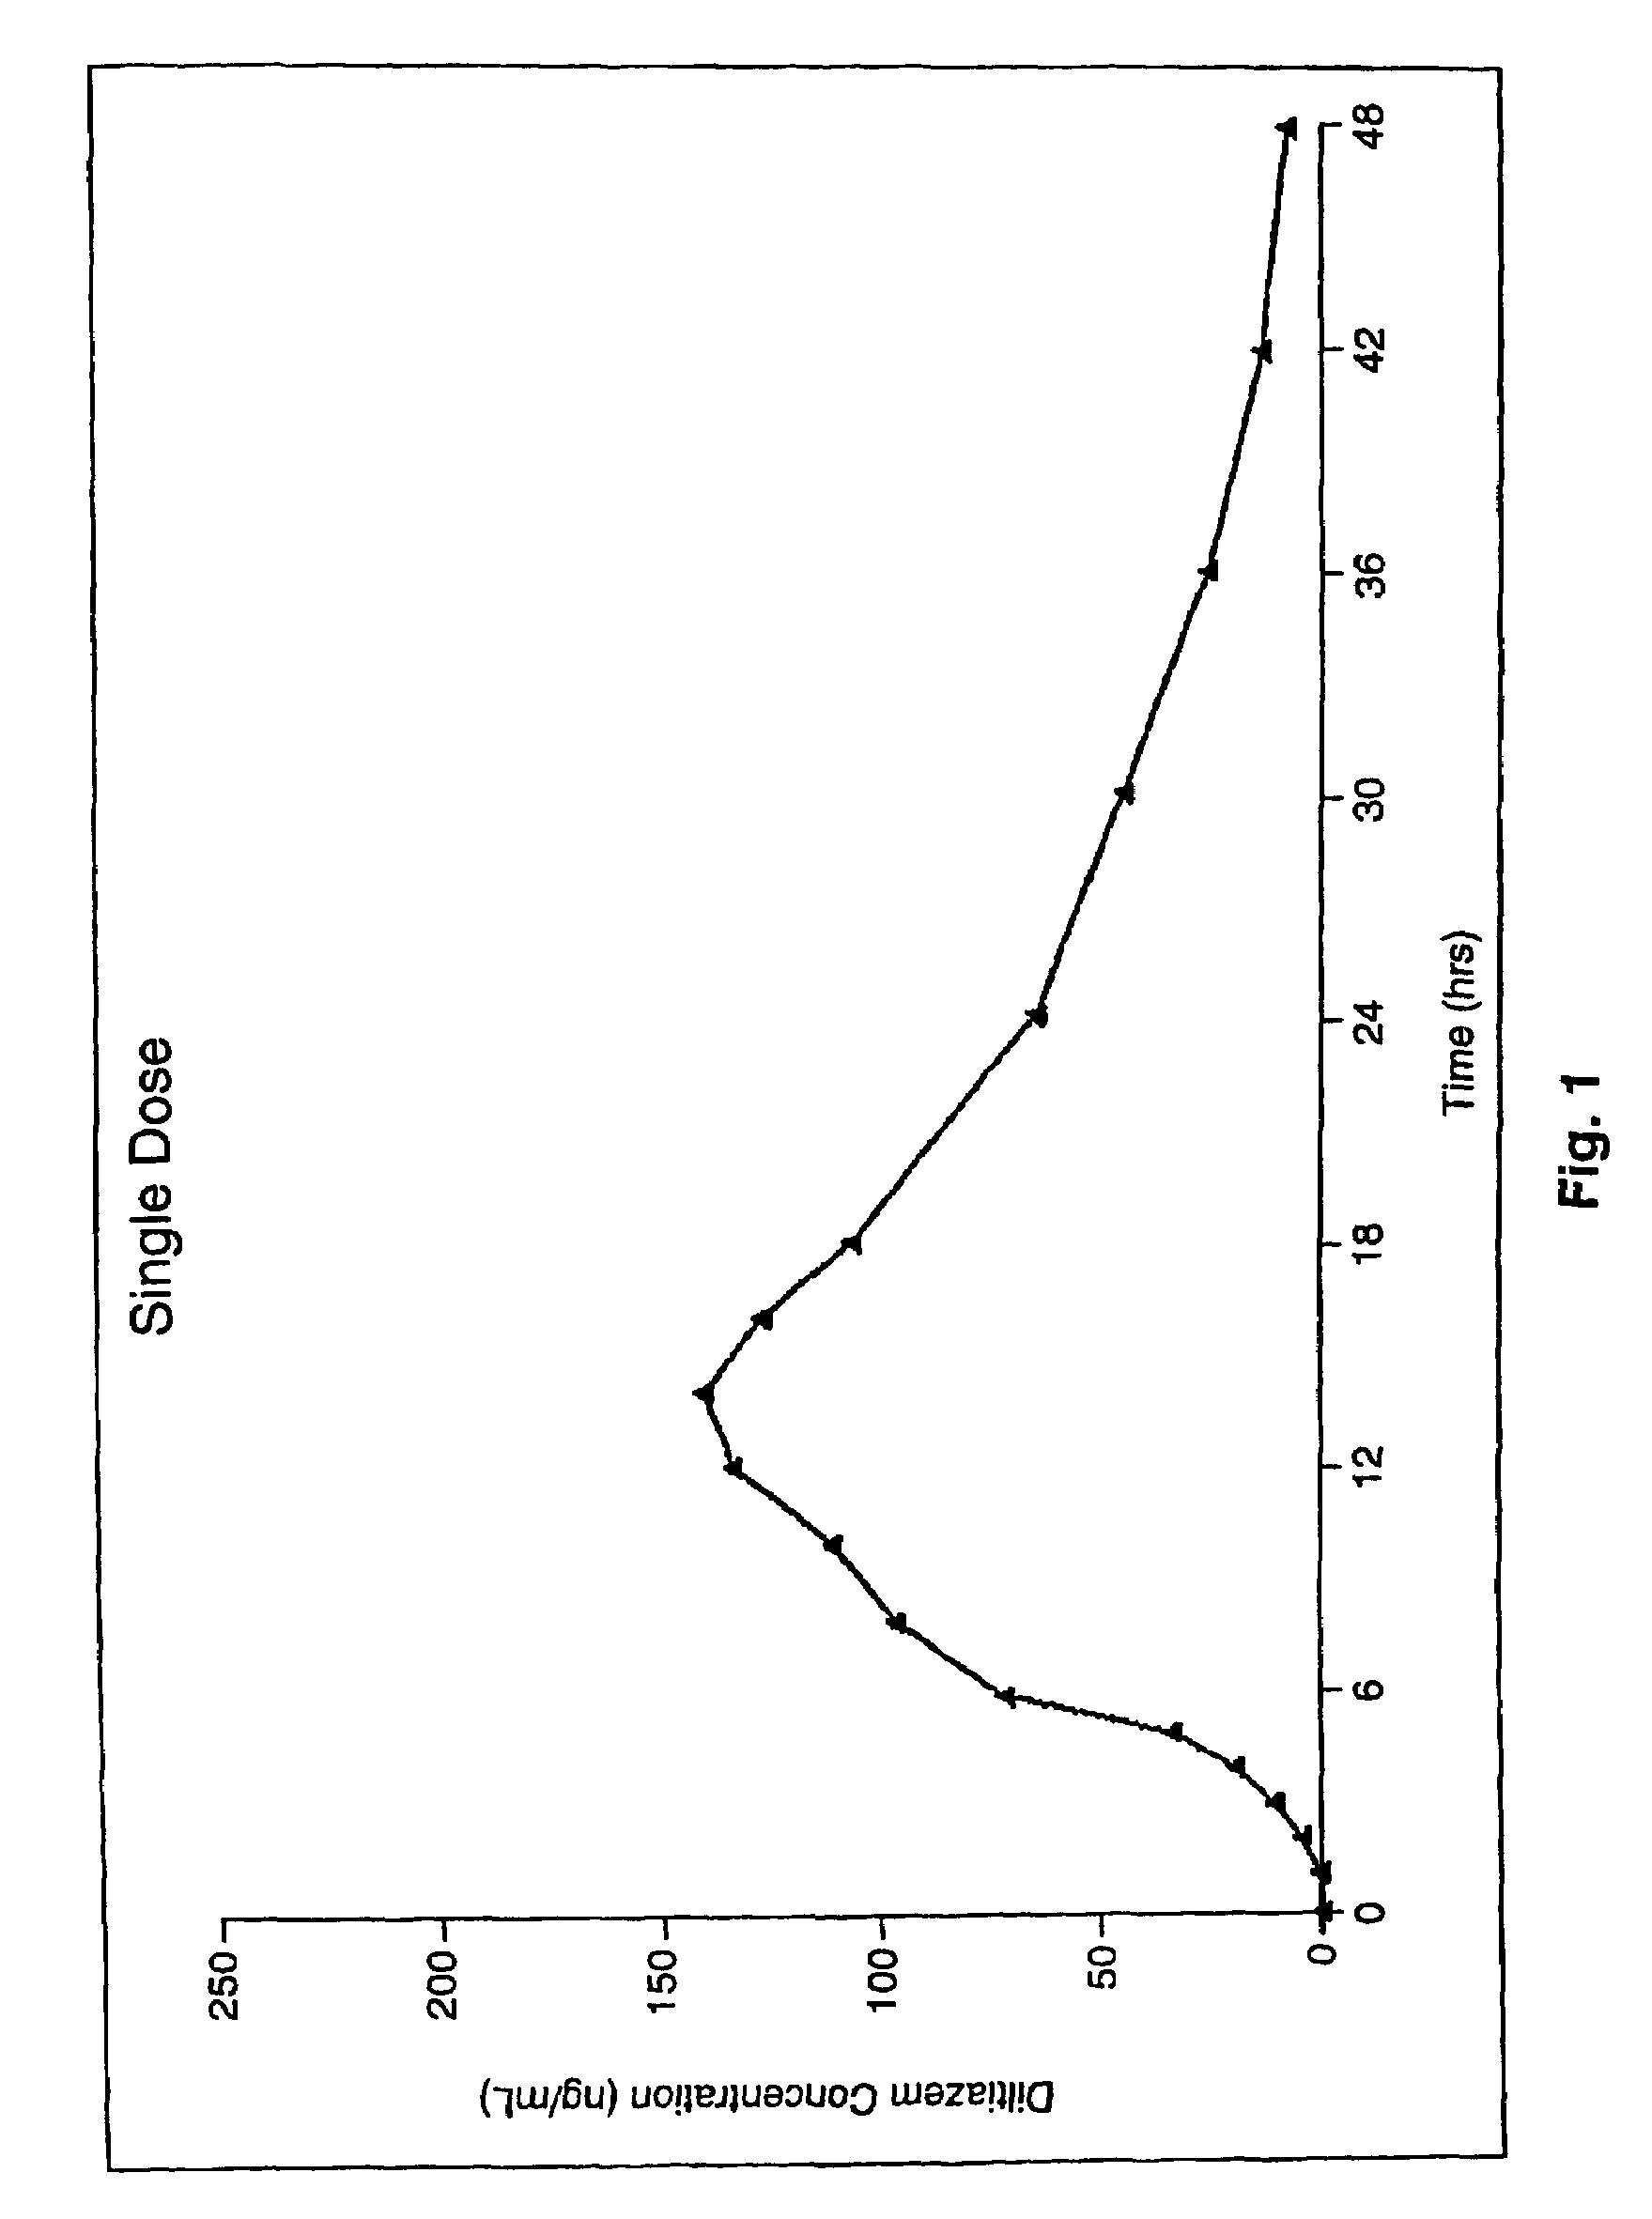 Chronotherapeutic diltiazem formulations and the administration thereof